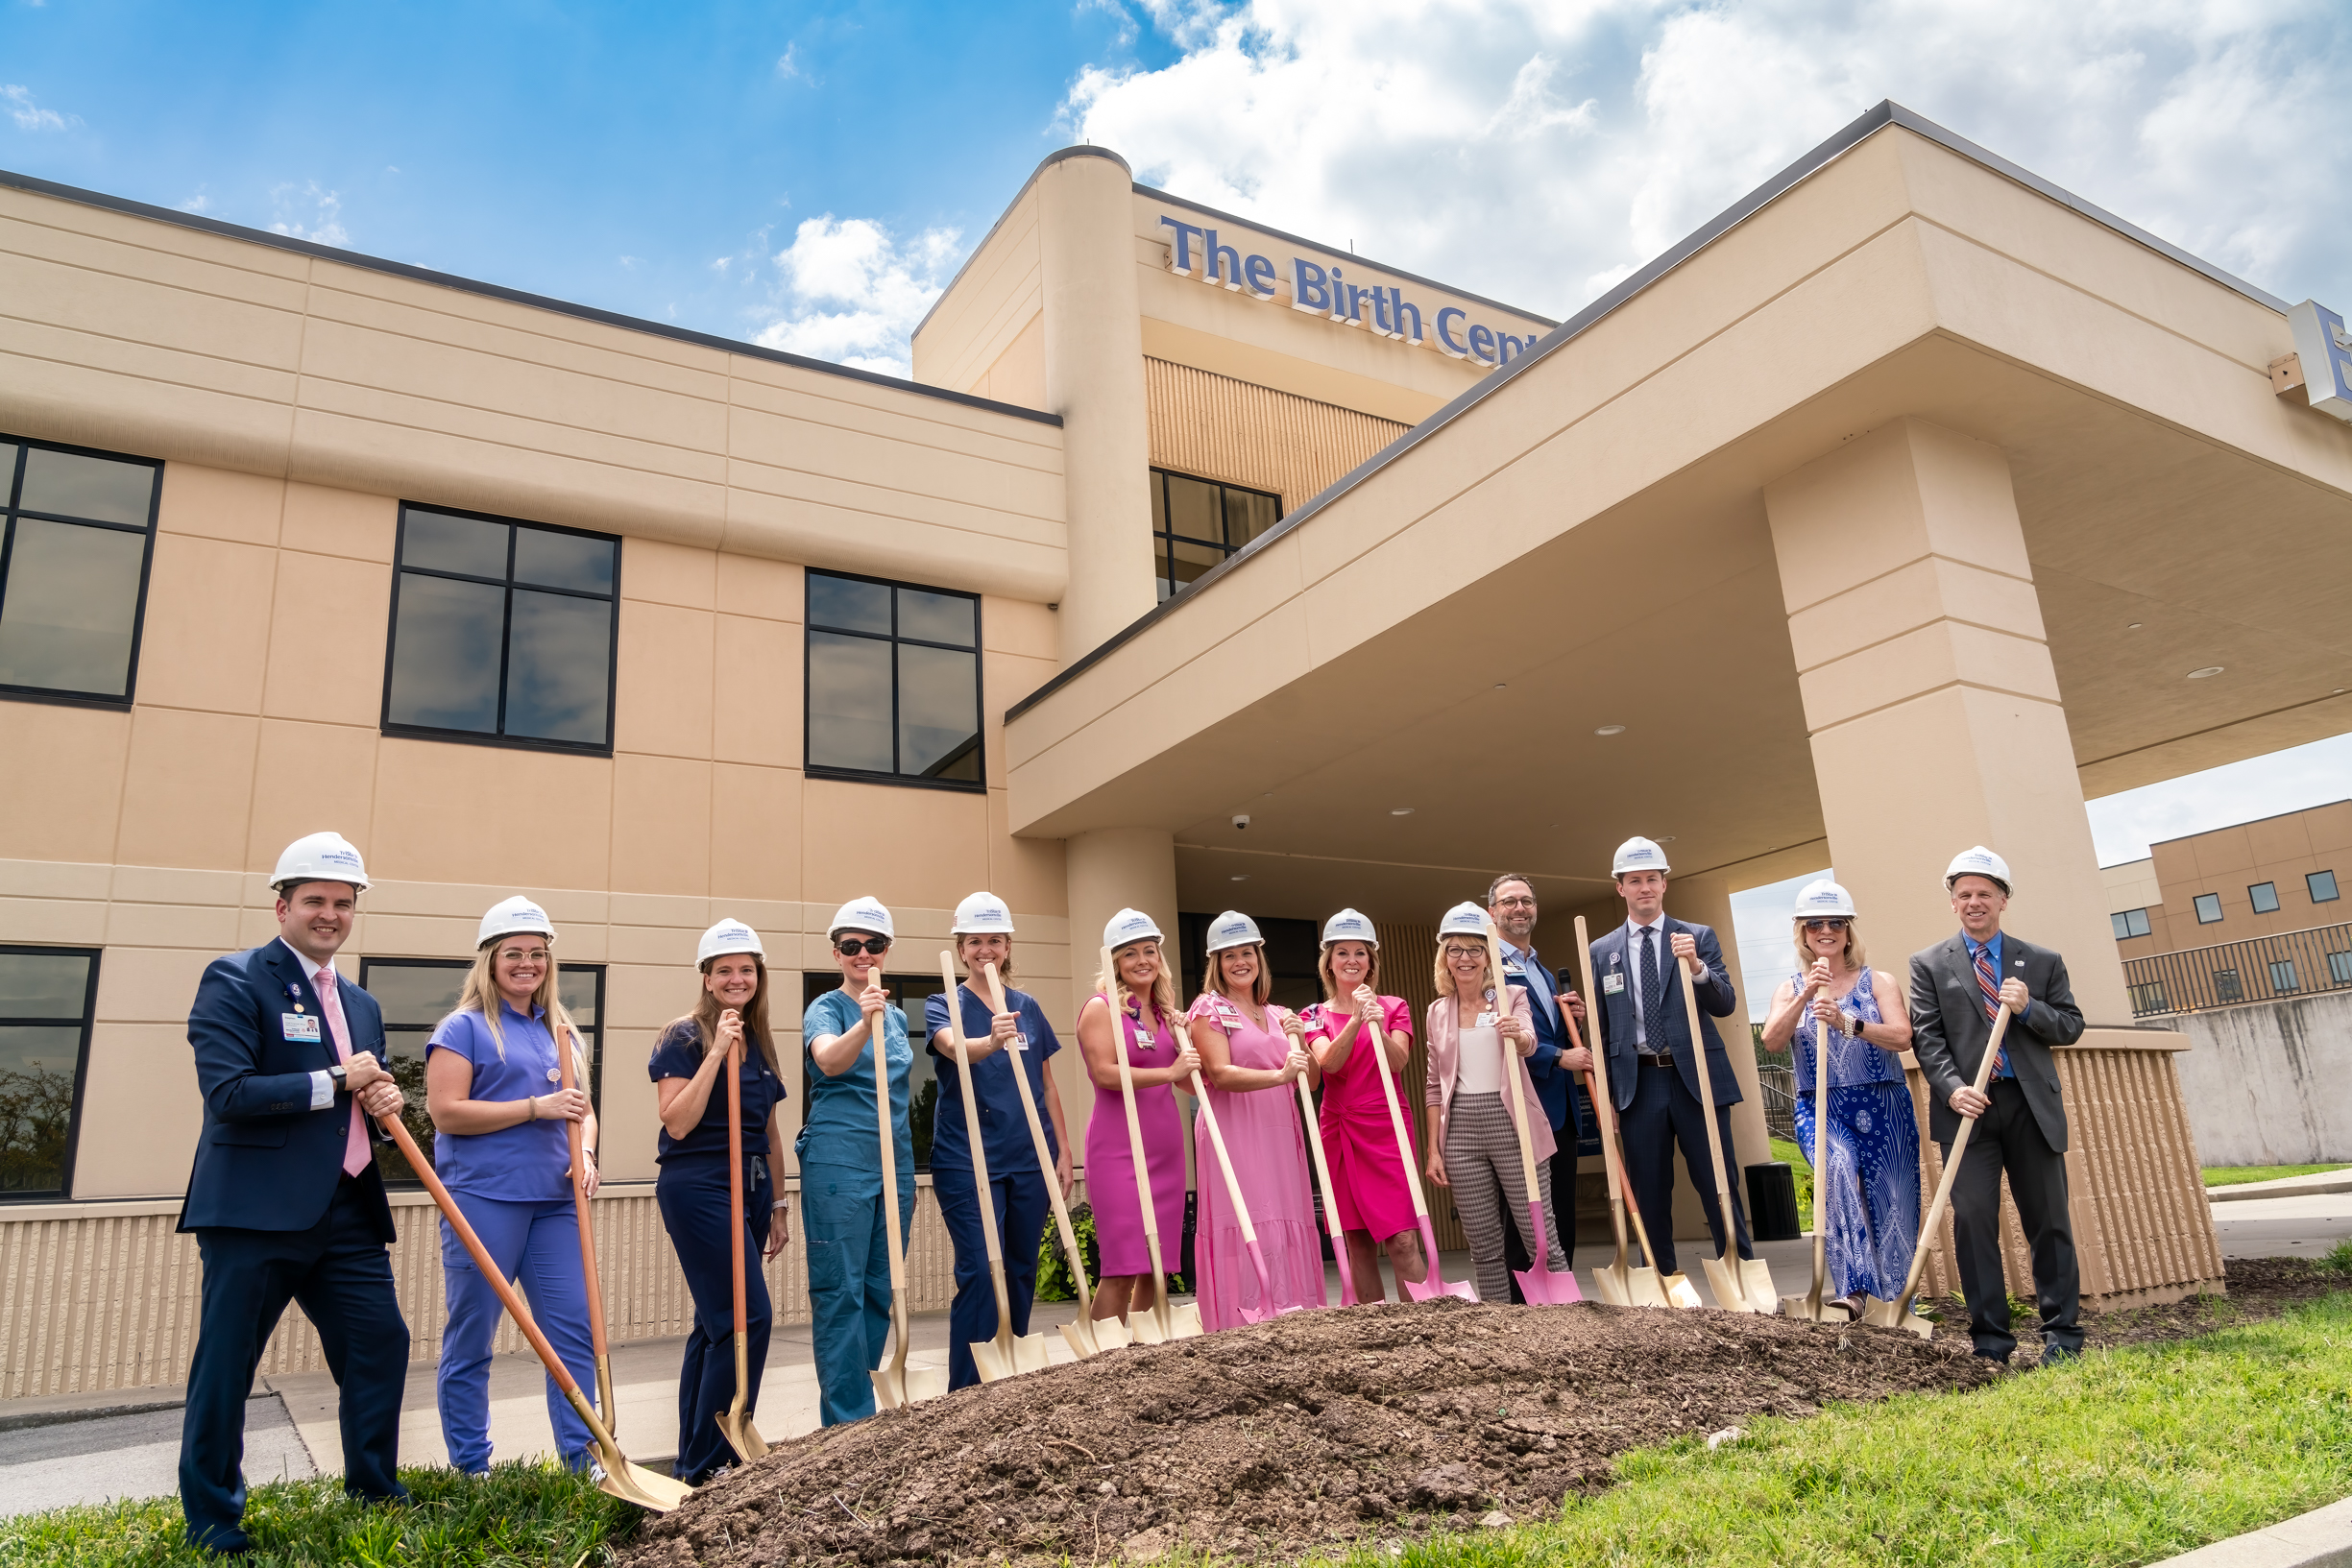 Tristar Hendersonville staff break ground with shovels and hardhats in the grass in front of the building